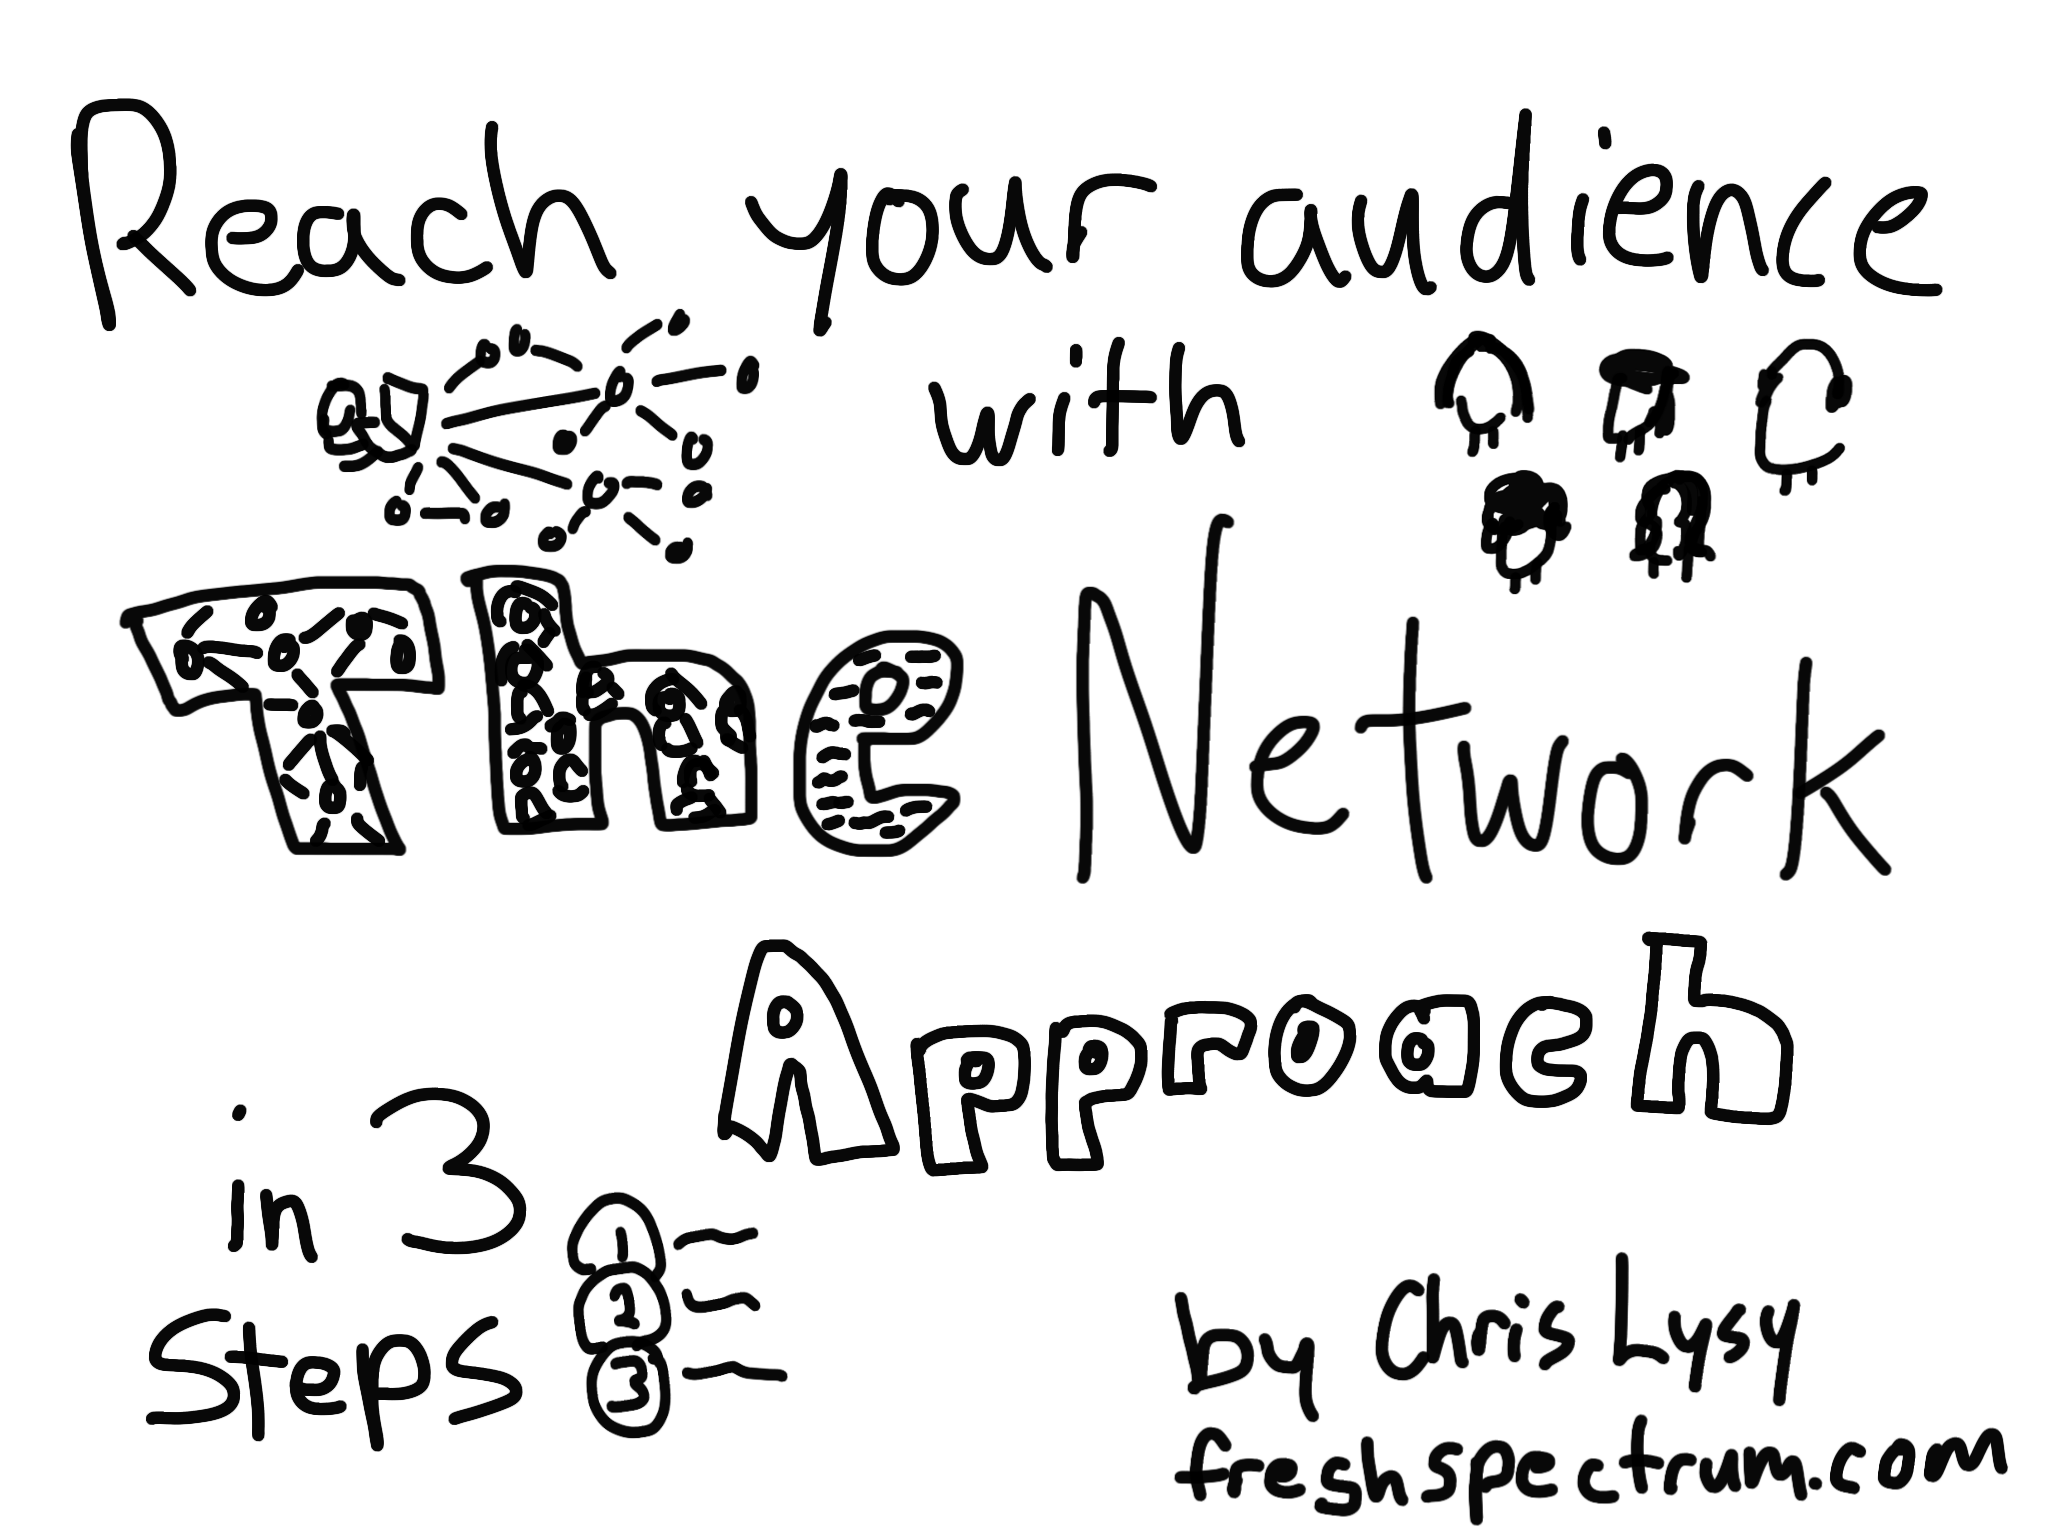 Reach your Audience with the Network Approach in 3 steps by Chris Lysy at freshspectrum.com